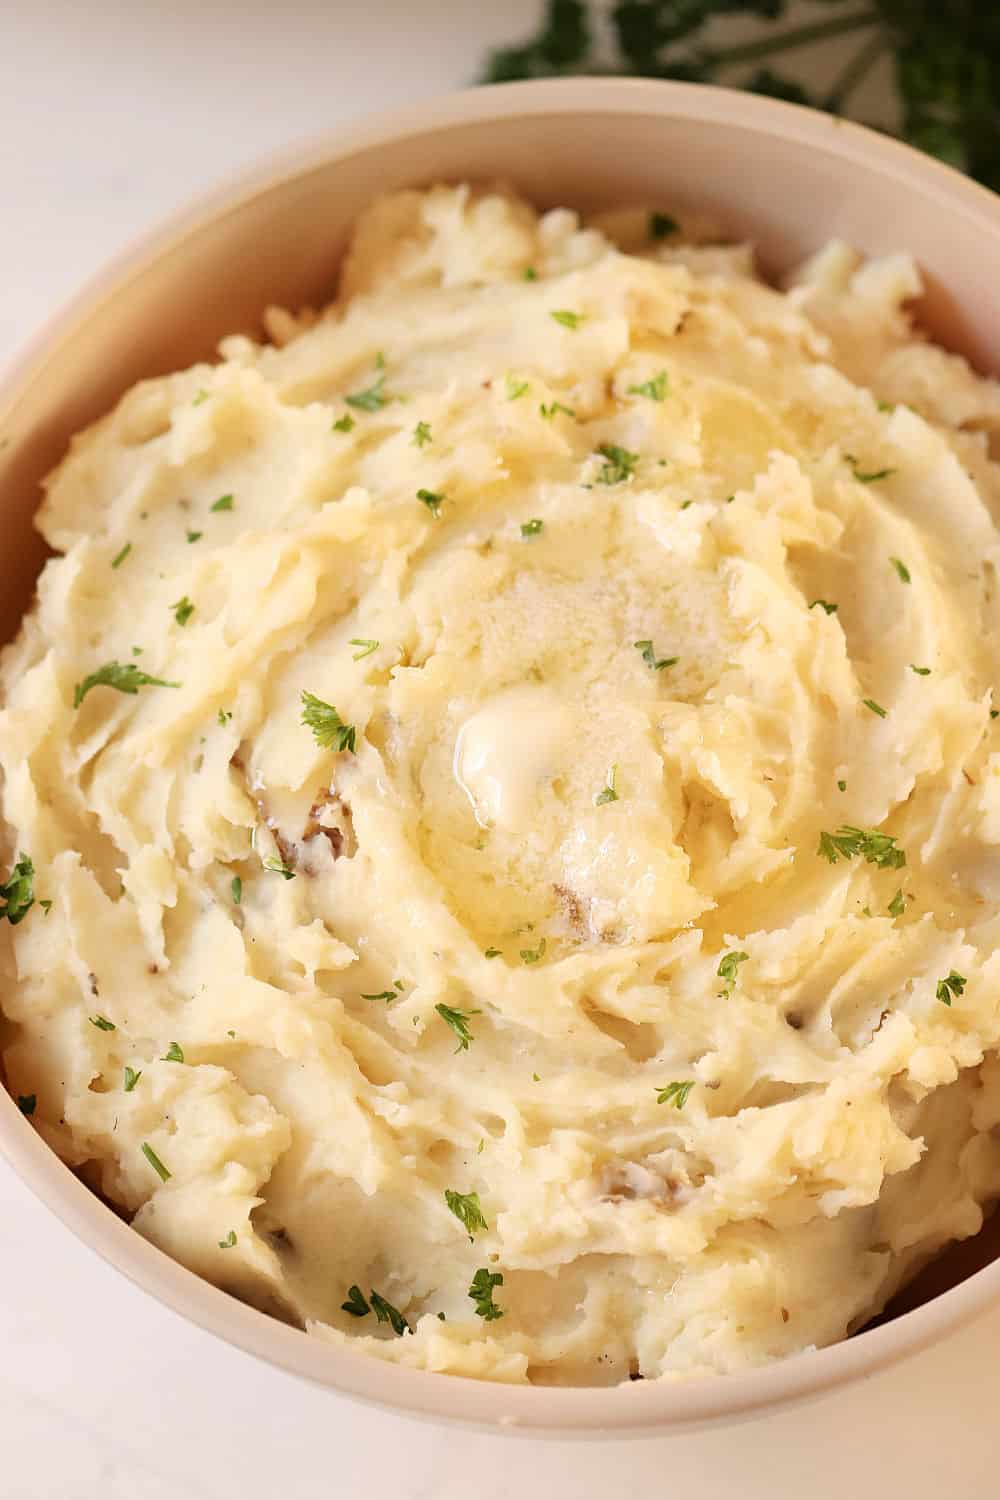 https://www.sixsistersstuff.com/wp-content/uploads/2020/11/The-perfect-mashed-potatoes-from-the-Instant-Pot.jpg